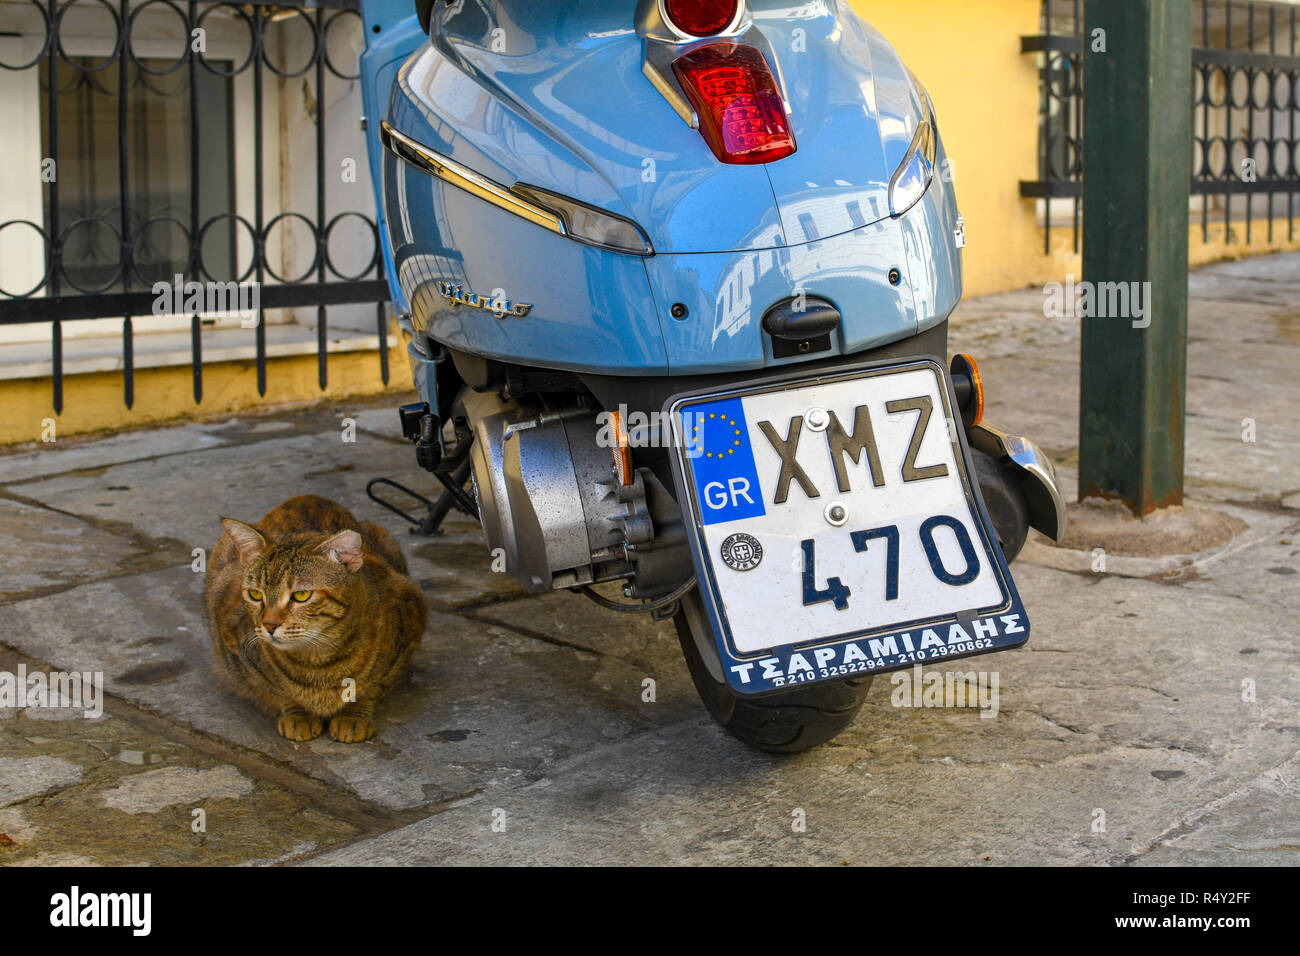 A stray tabby cat sits next to a blue Vespa style motorbike scooter in the Plaka district of Athens, Greece. Stock Photo